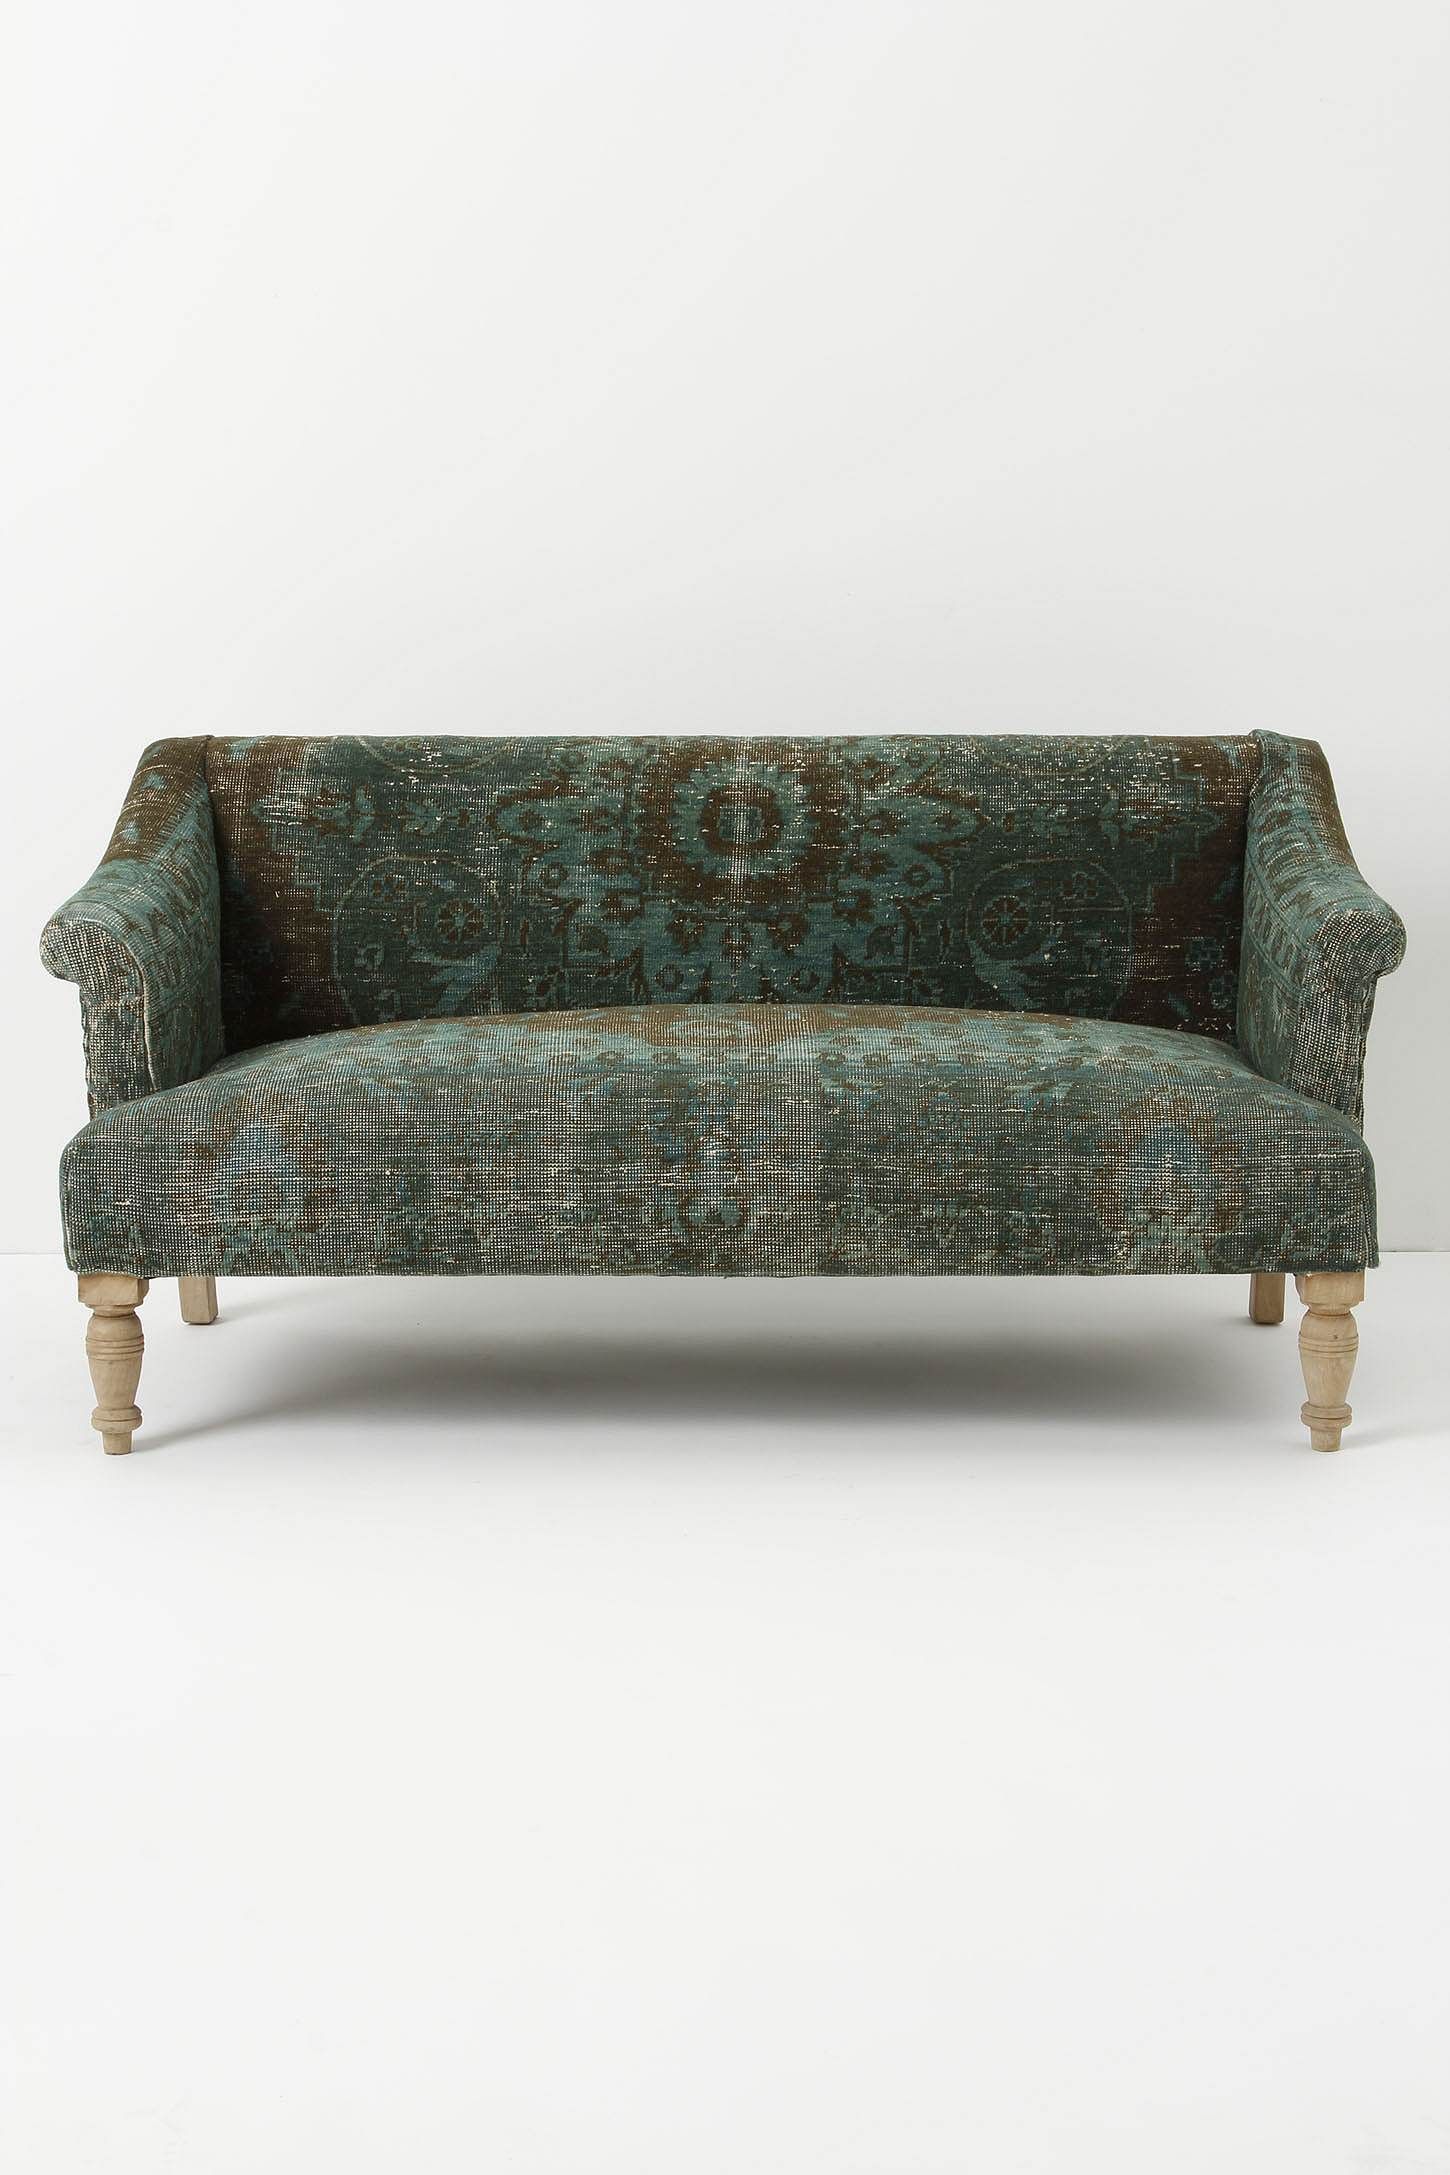 Abigail Settee From Anthropologie | Furniture – Sofas & Chaises Regarding Abigail Ii Sofa Chairs (Photo 5 of 20)